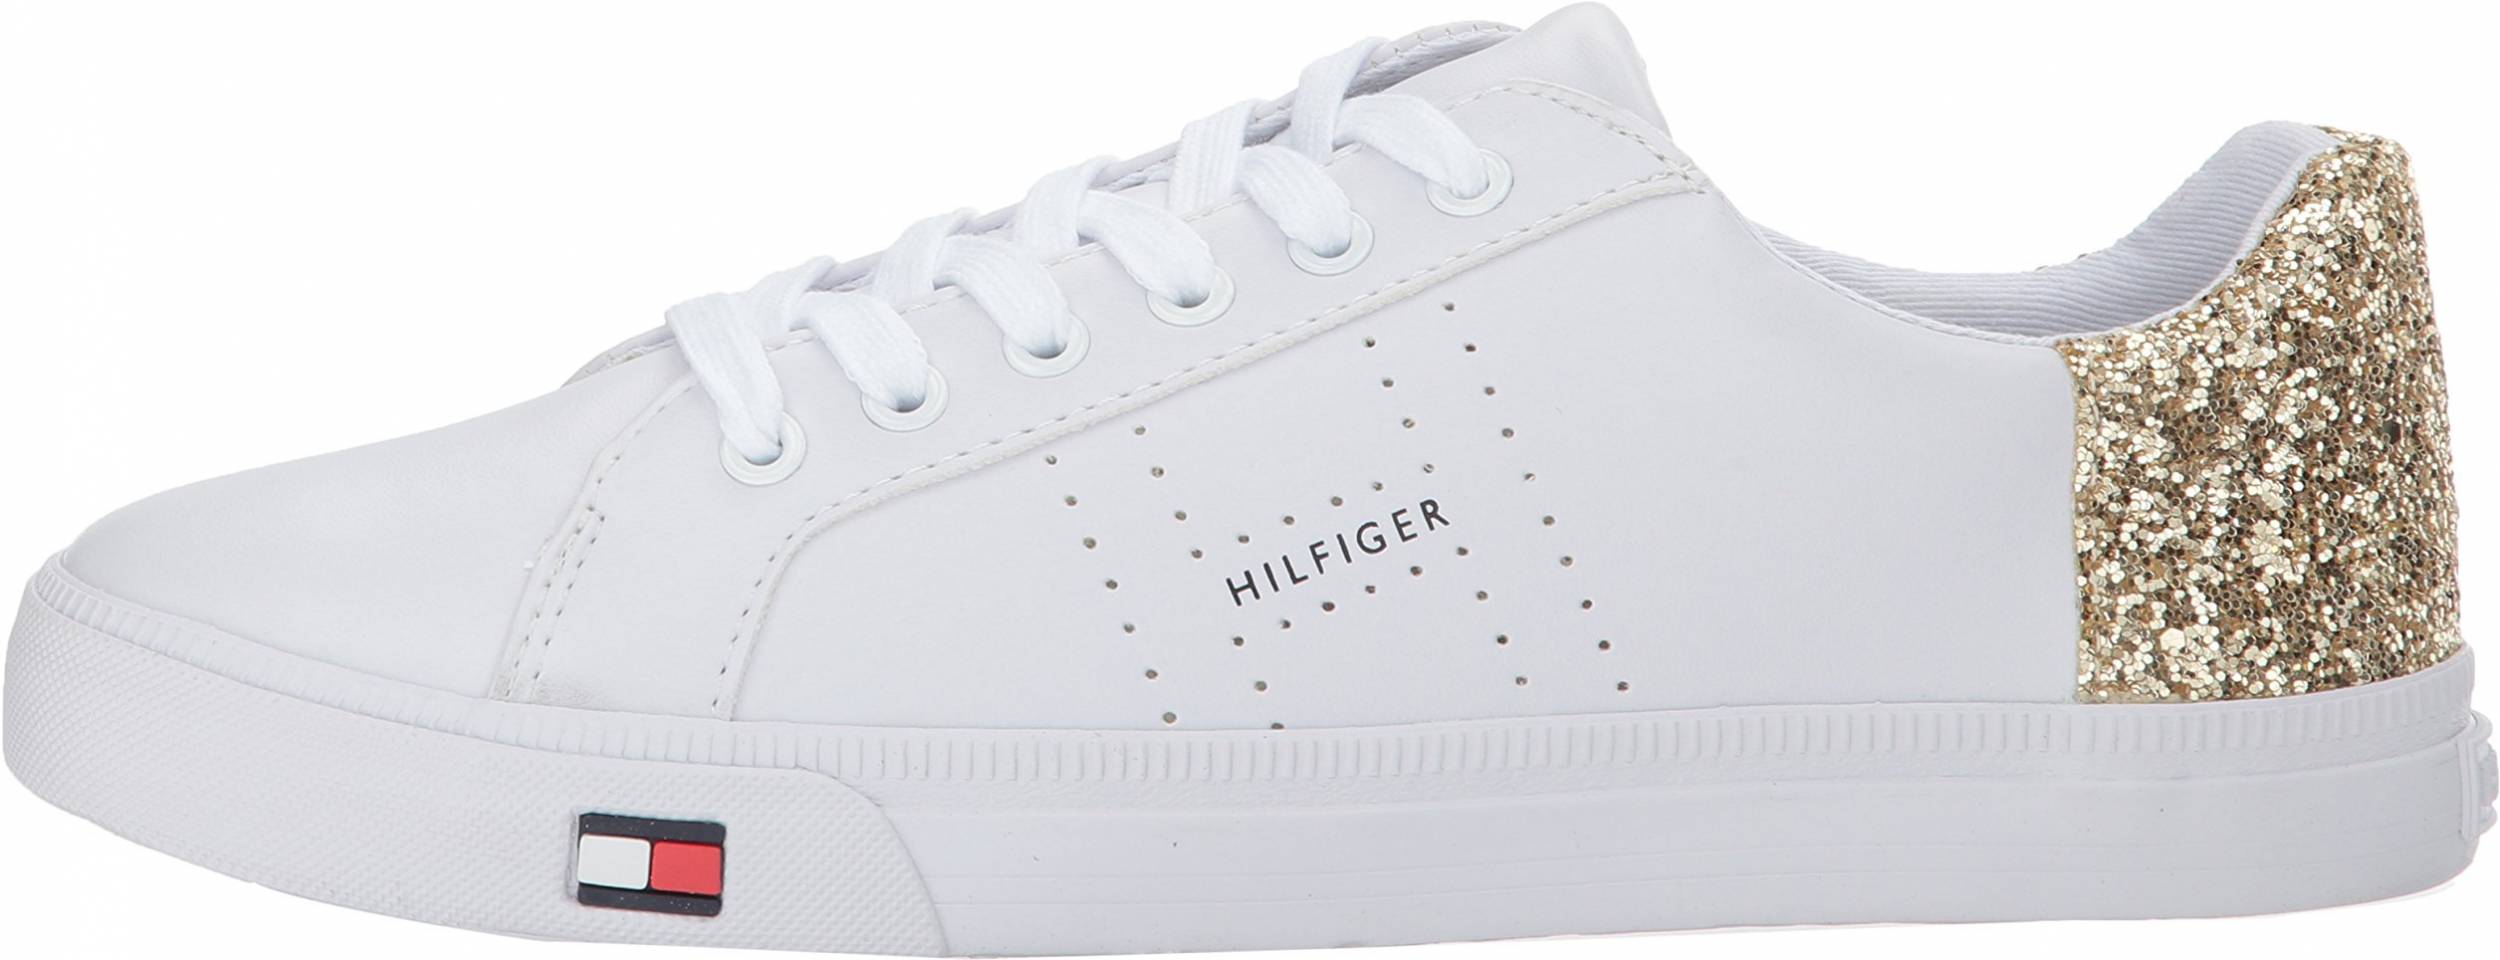 tommy hilfiger white tennis shoes